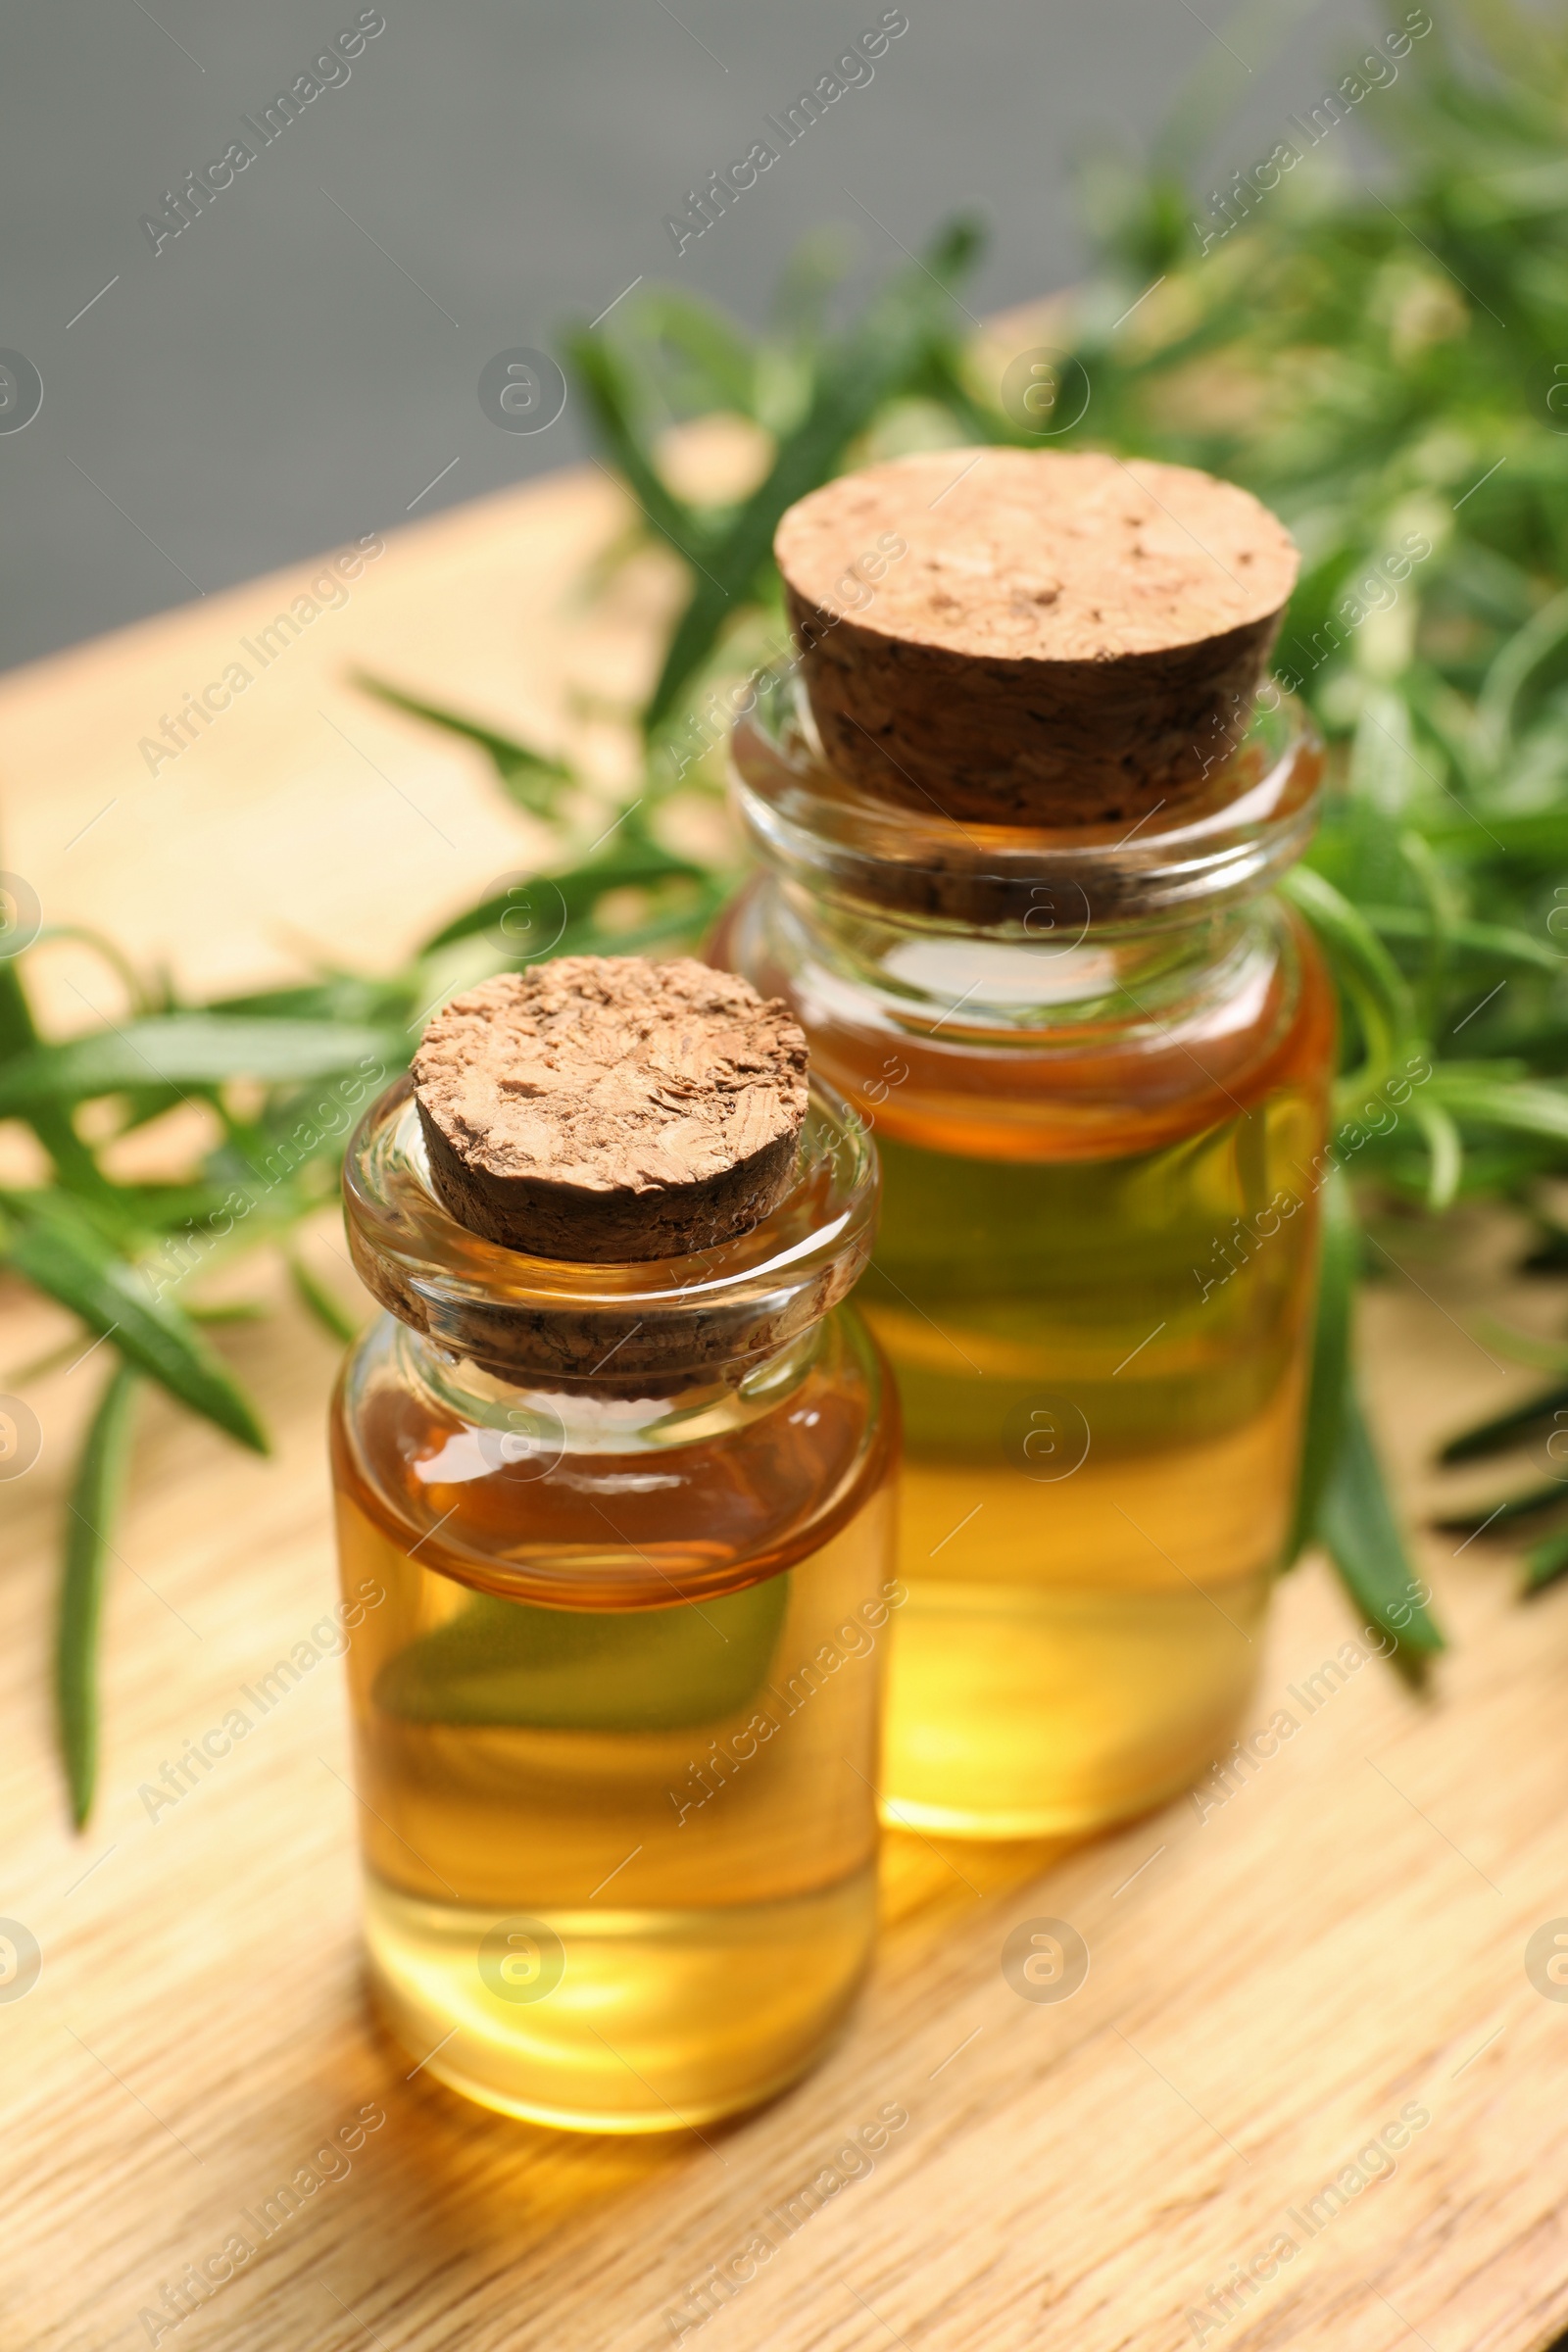 Photo of Bottles of essential oil and fresh rosemary sprigs on table, closeup